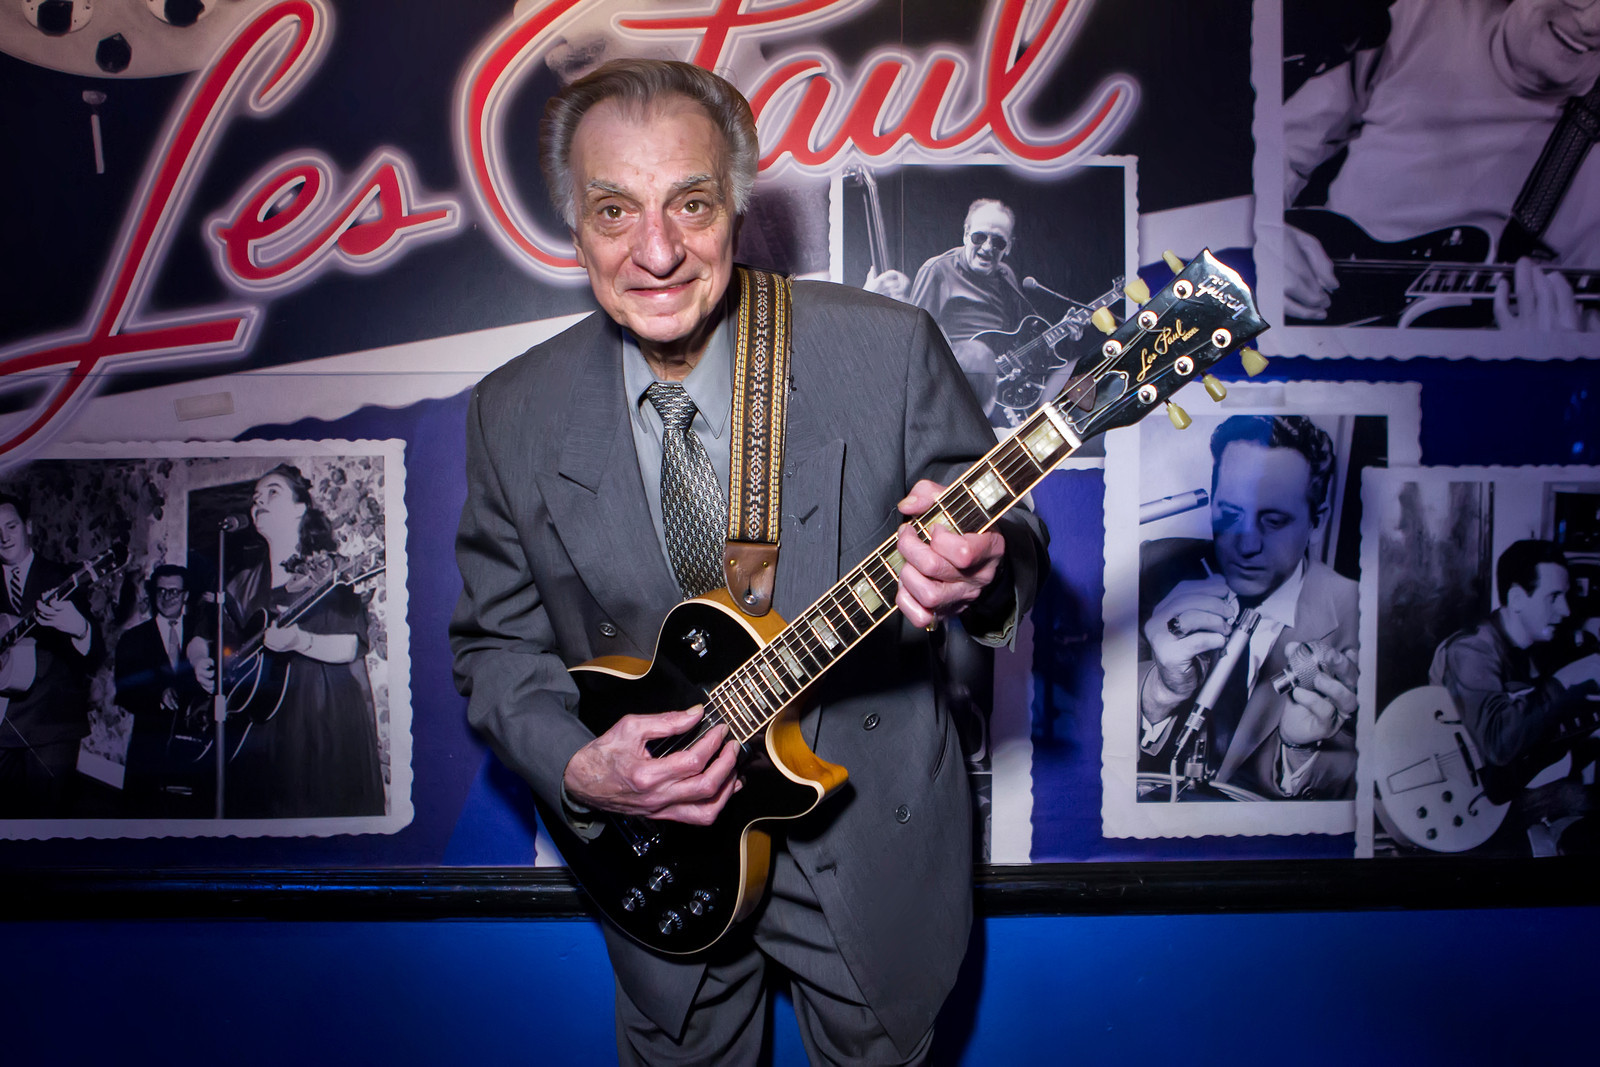 All in honor of Les Paul